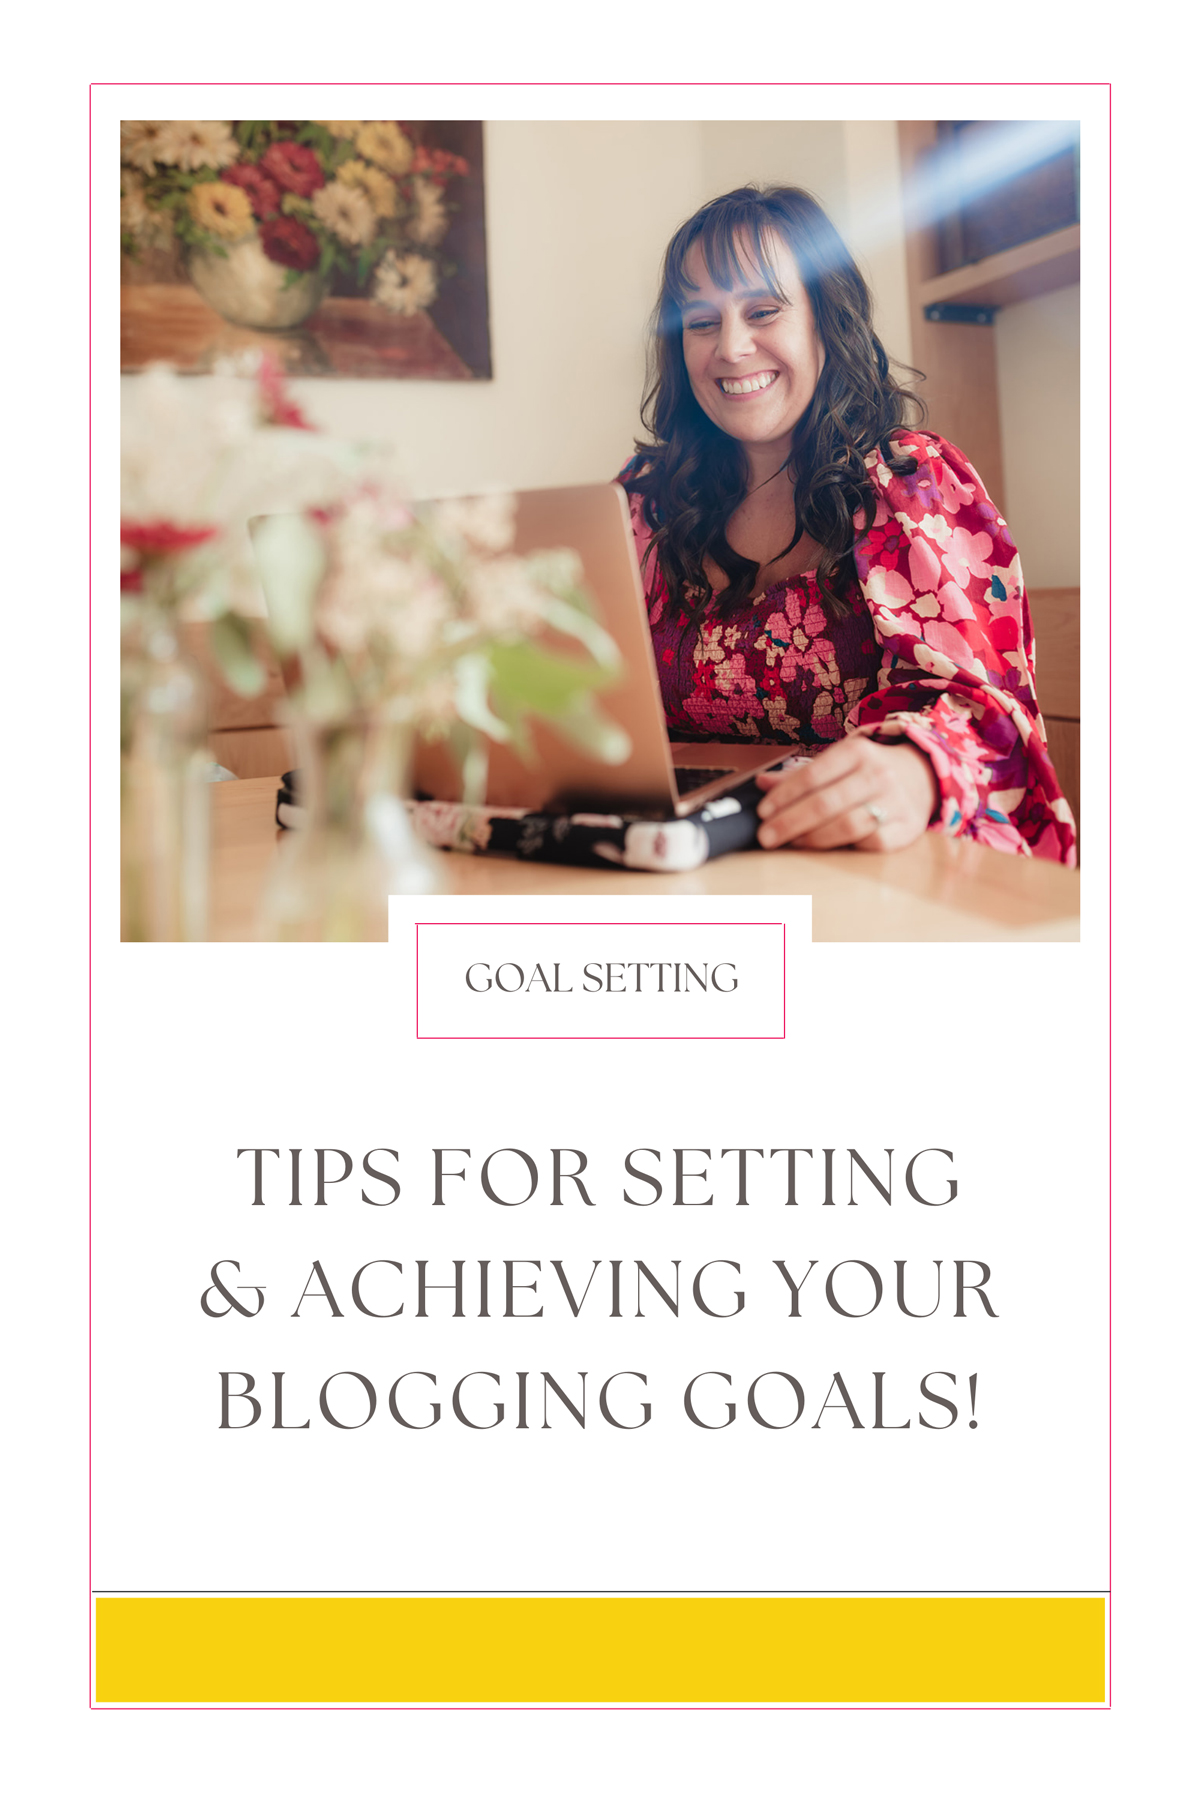 How to create goals for your blog that are achievable